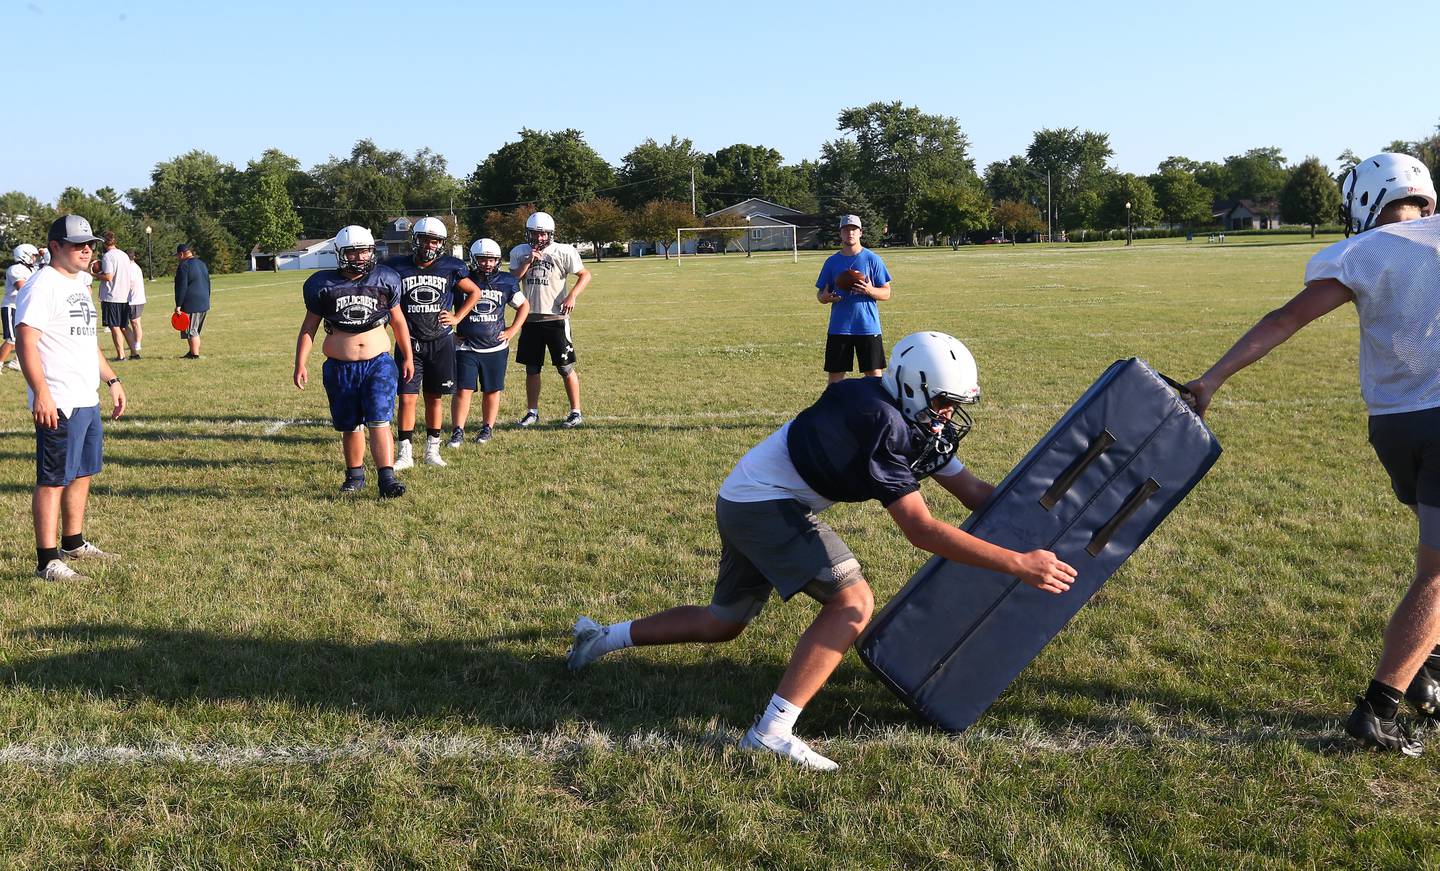 Members of the Fieldcrest football team work on strength and conditioning drills during football camp on Monday, July 18, 2022 at New Millennia Park in Minonk.